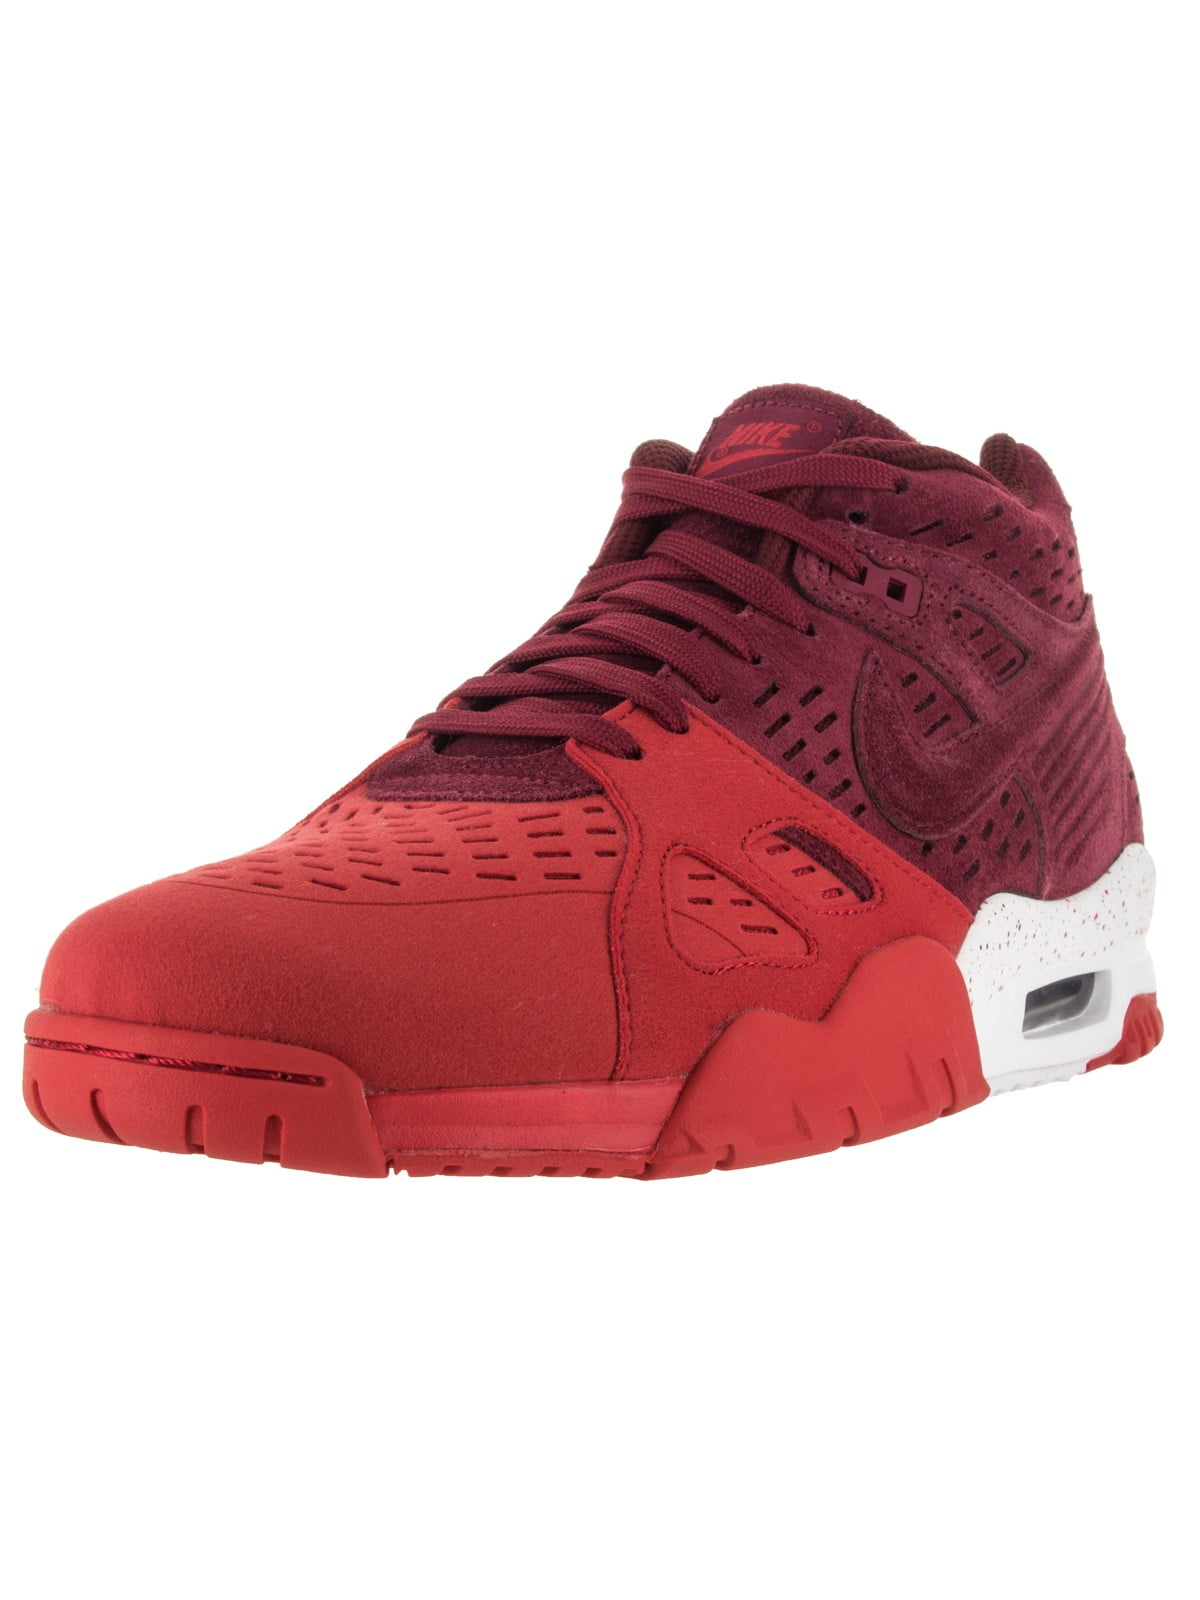 men's nike air trainer 3 training shoes